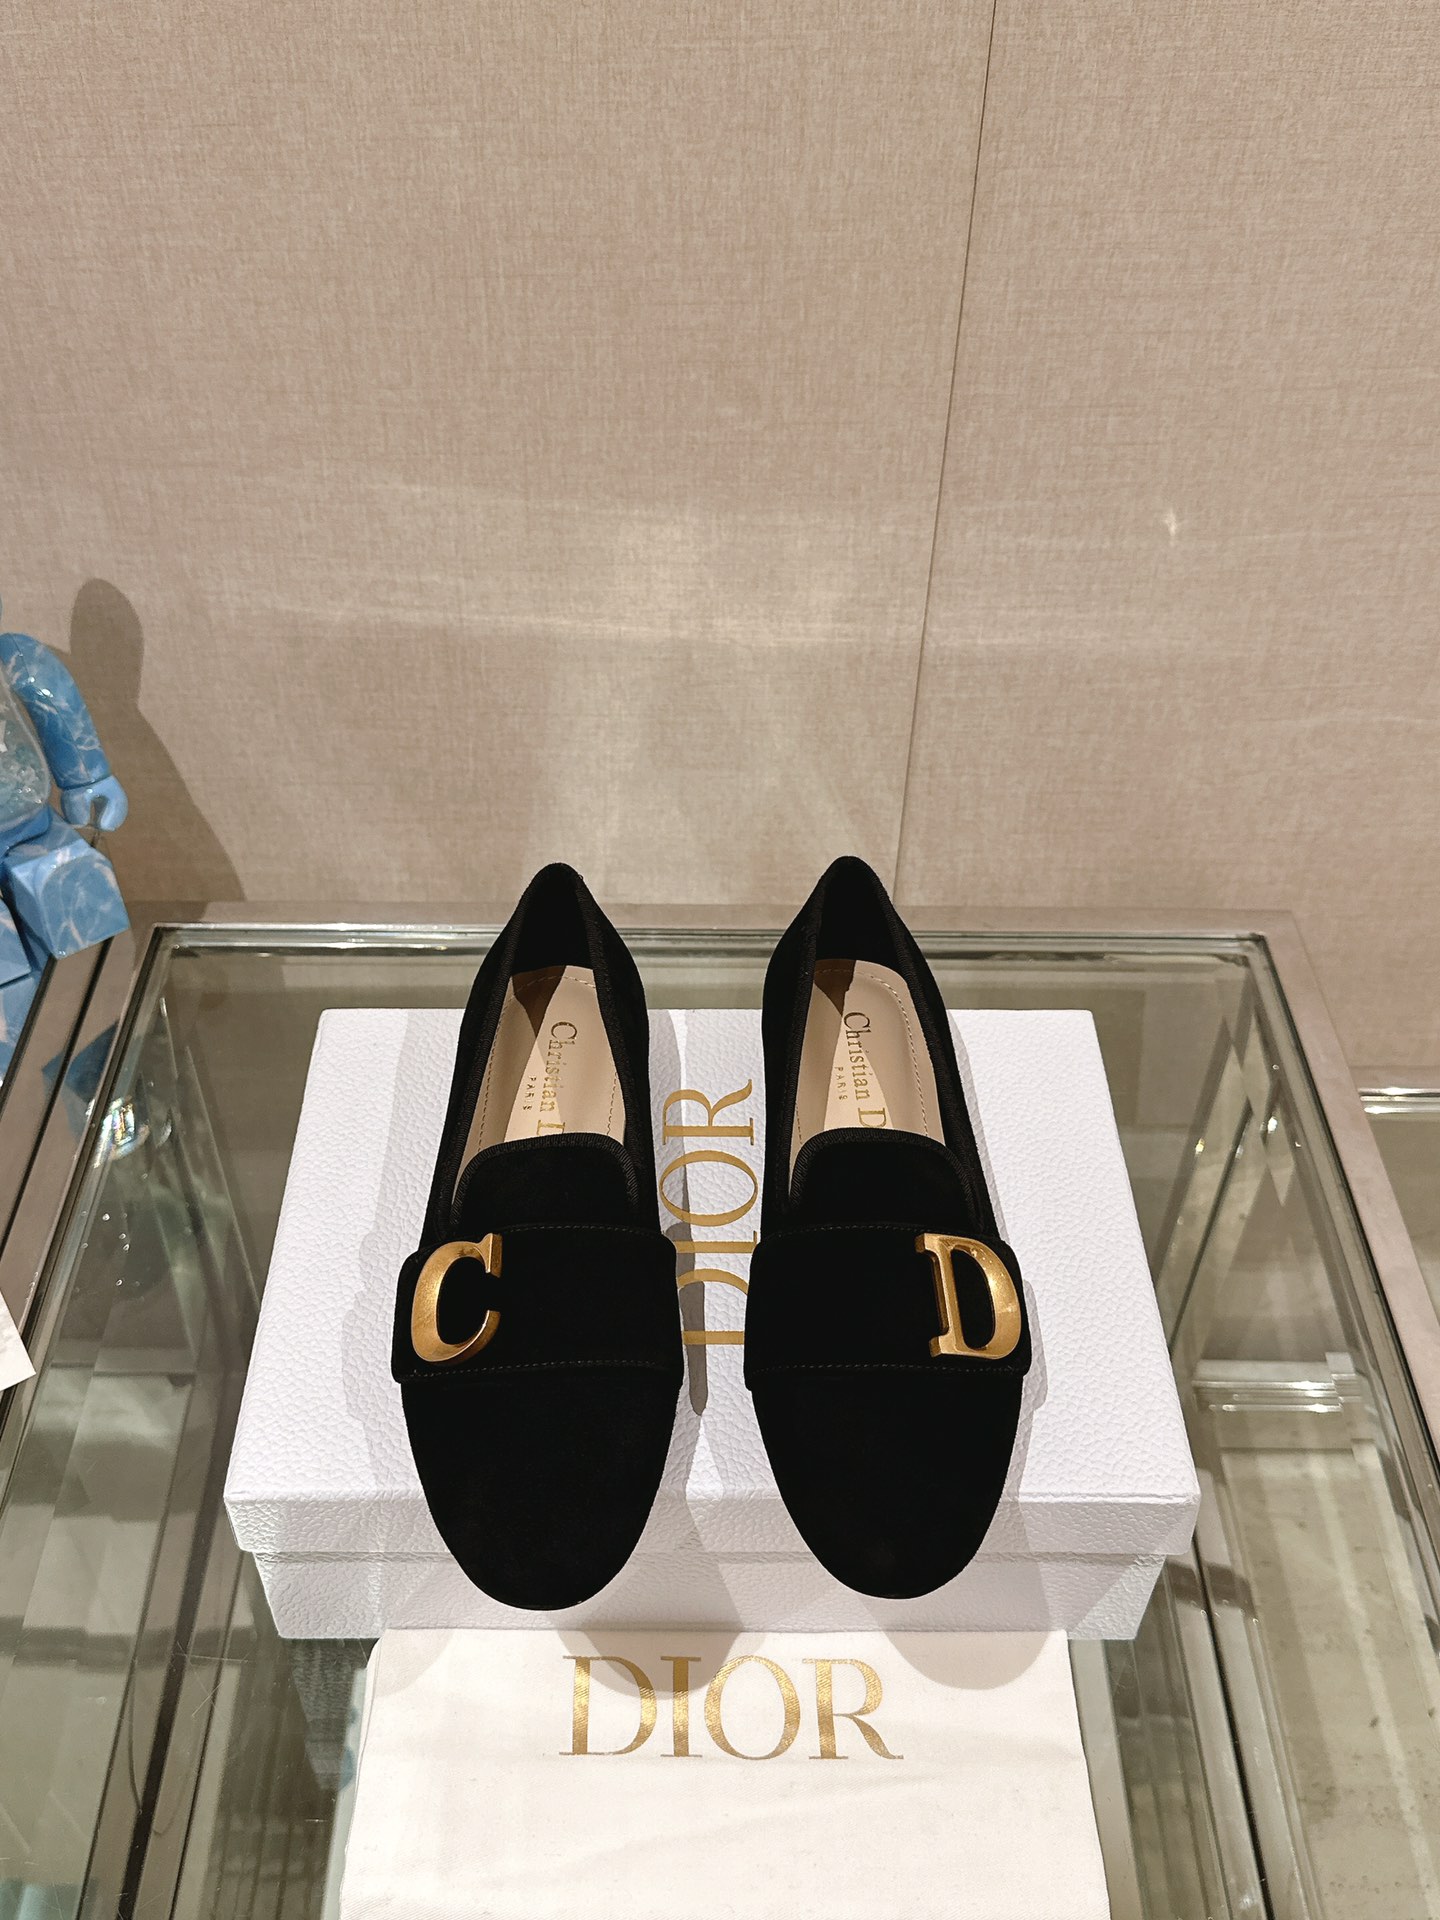 Dior Flat Shoes Loafers Single Layer Shoes Replica Shop
 Gold Genuine Leather Patent Sheepskin Fashion